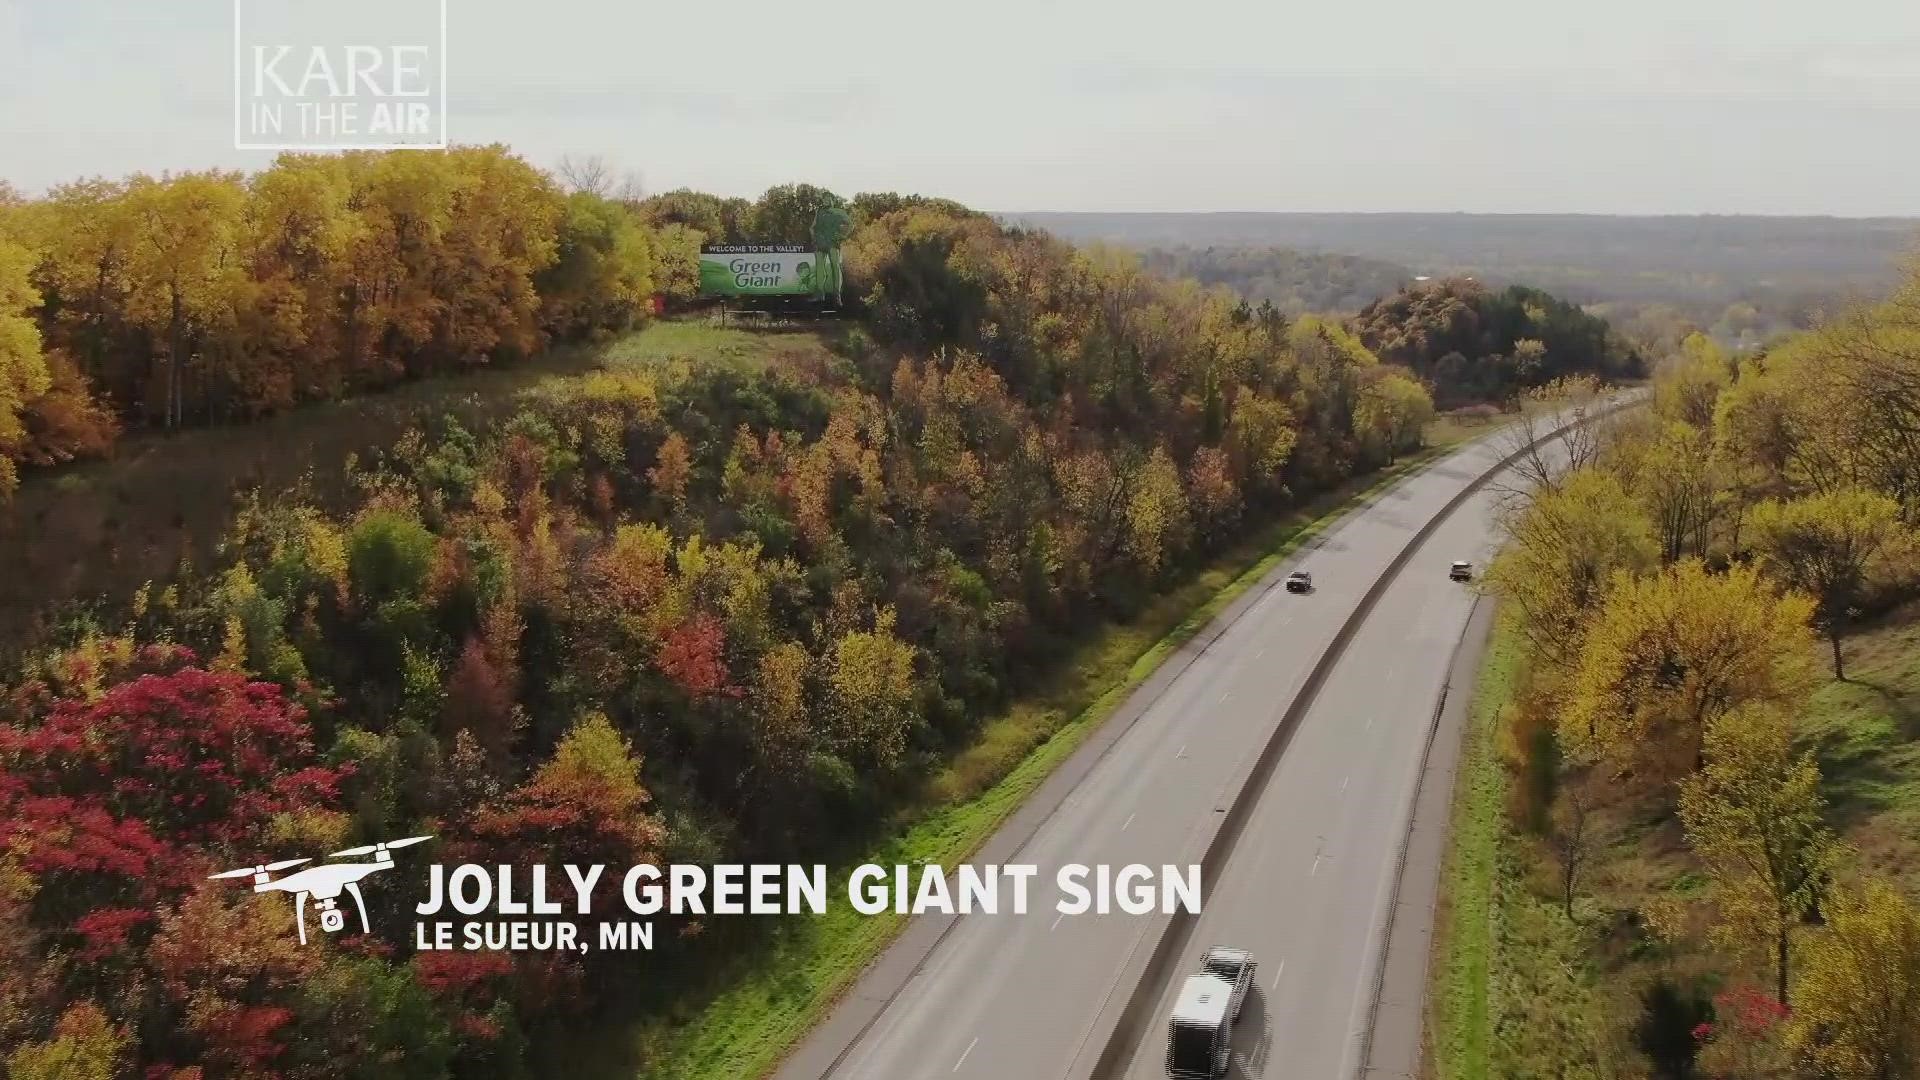 High on a hill greeting motorists headed southbound on Highway 169 near Le Sueur stands a sign welcoming one and all to the Valley of the Jolly Green Giant.